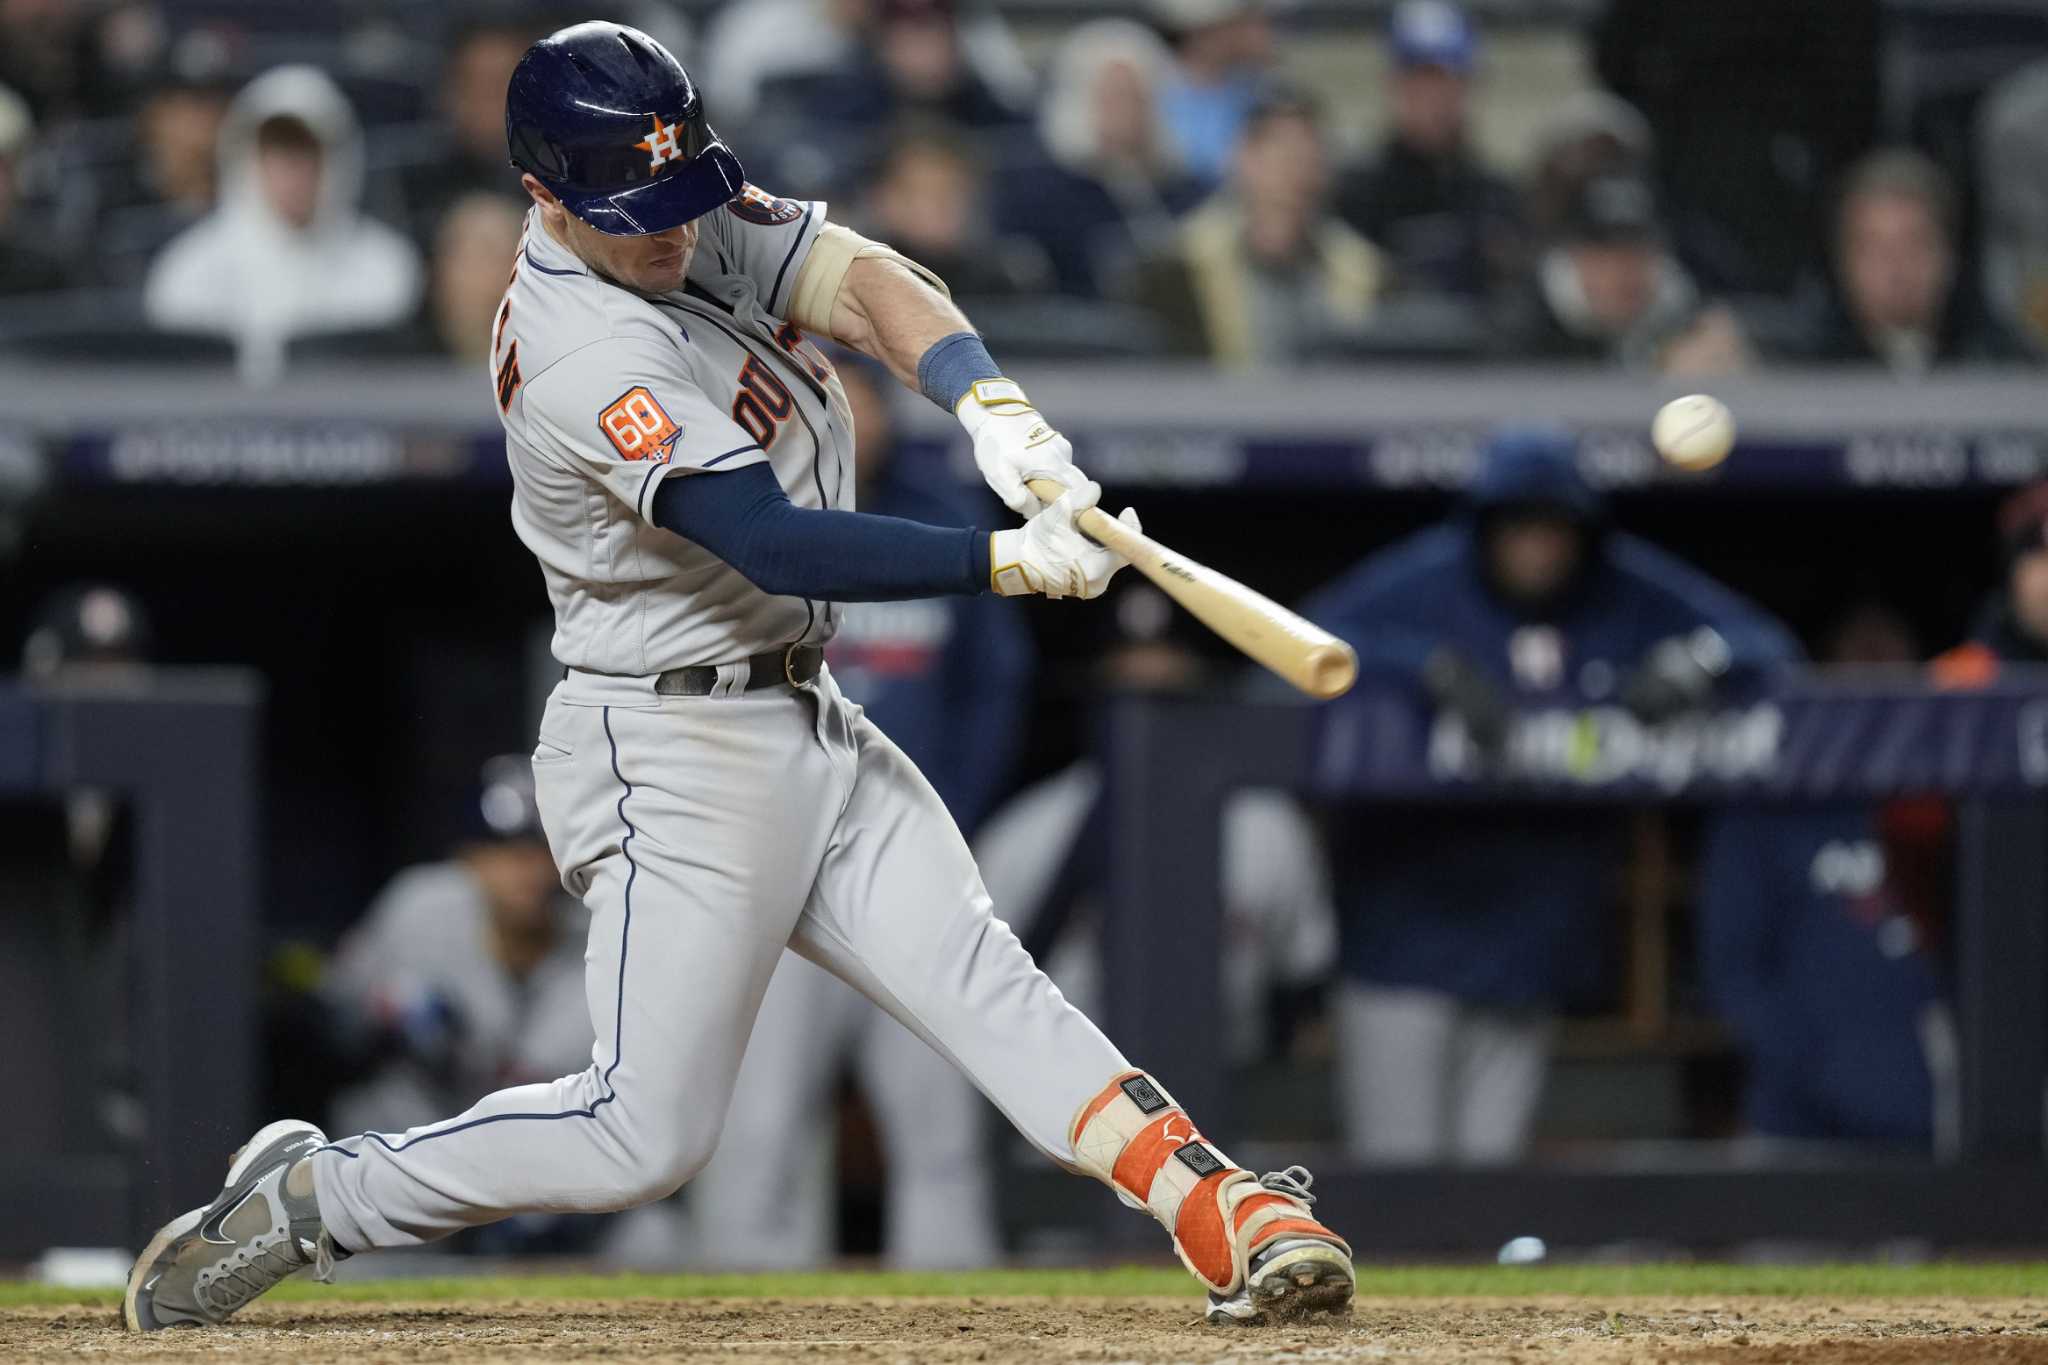 Torres' 2-run homer and dash from first leads Yankees over Orioles